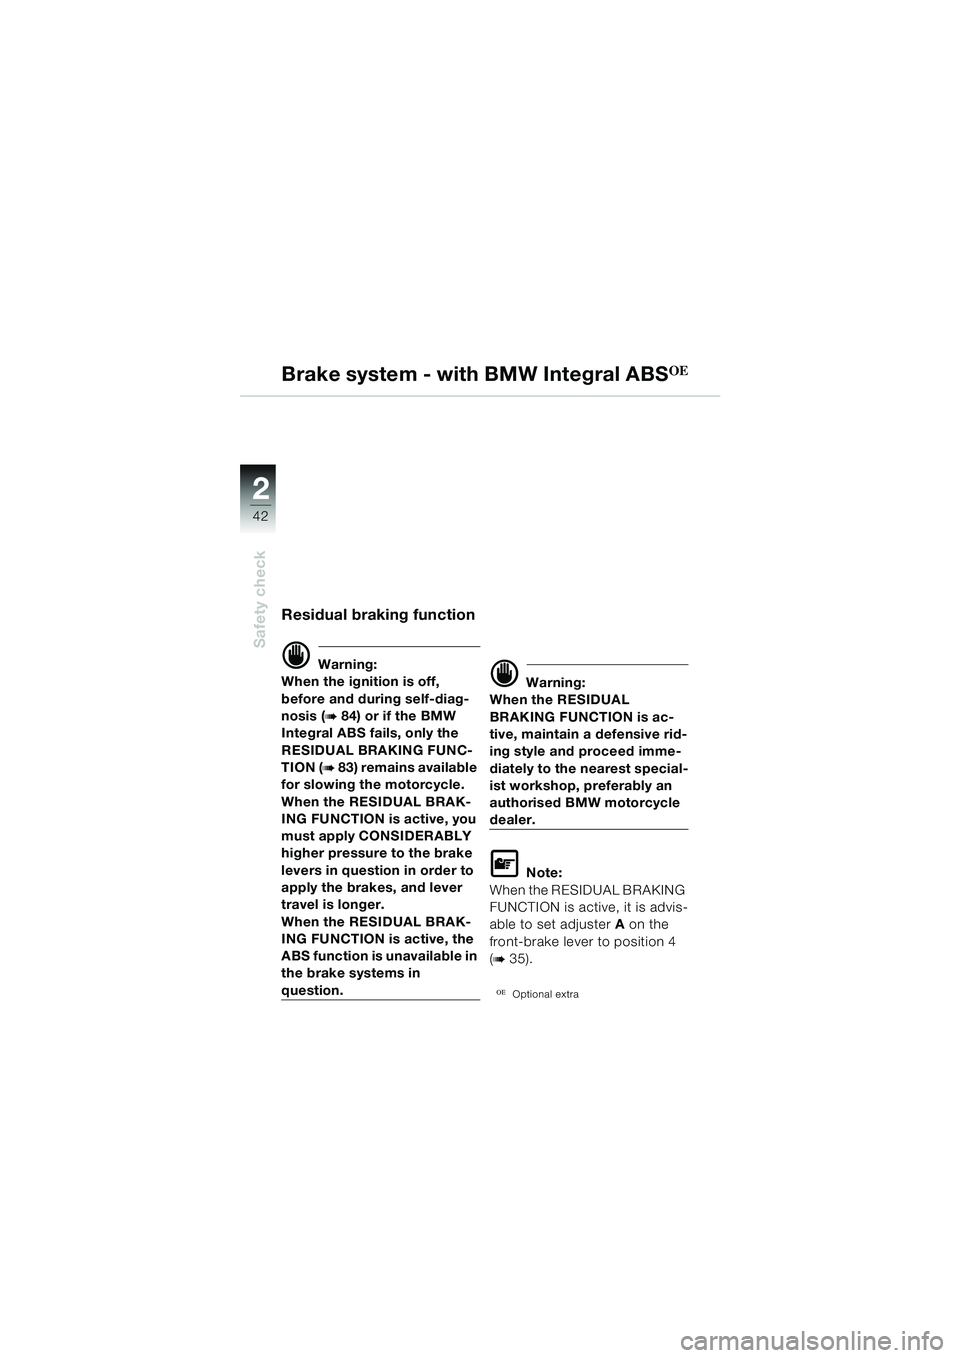 BMW MOTORRAD R 1150 GS 2002  Riders Manual (in English) 2
42
Safety check
Brake system - with BMW Integral ABSOE
Residual braking function
d Warning:
When the ignition is off, 
before and during self-diag-
nosis (
b 84) or if the BMW 
Integral ABS fails, o